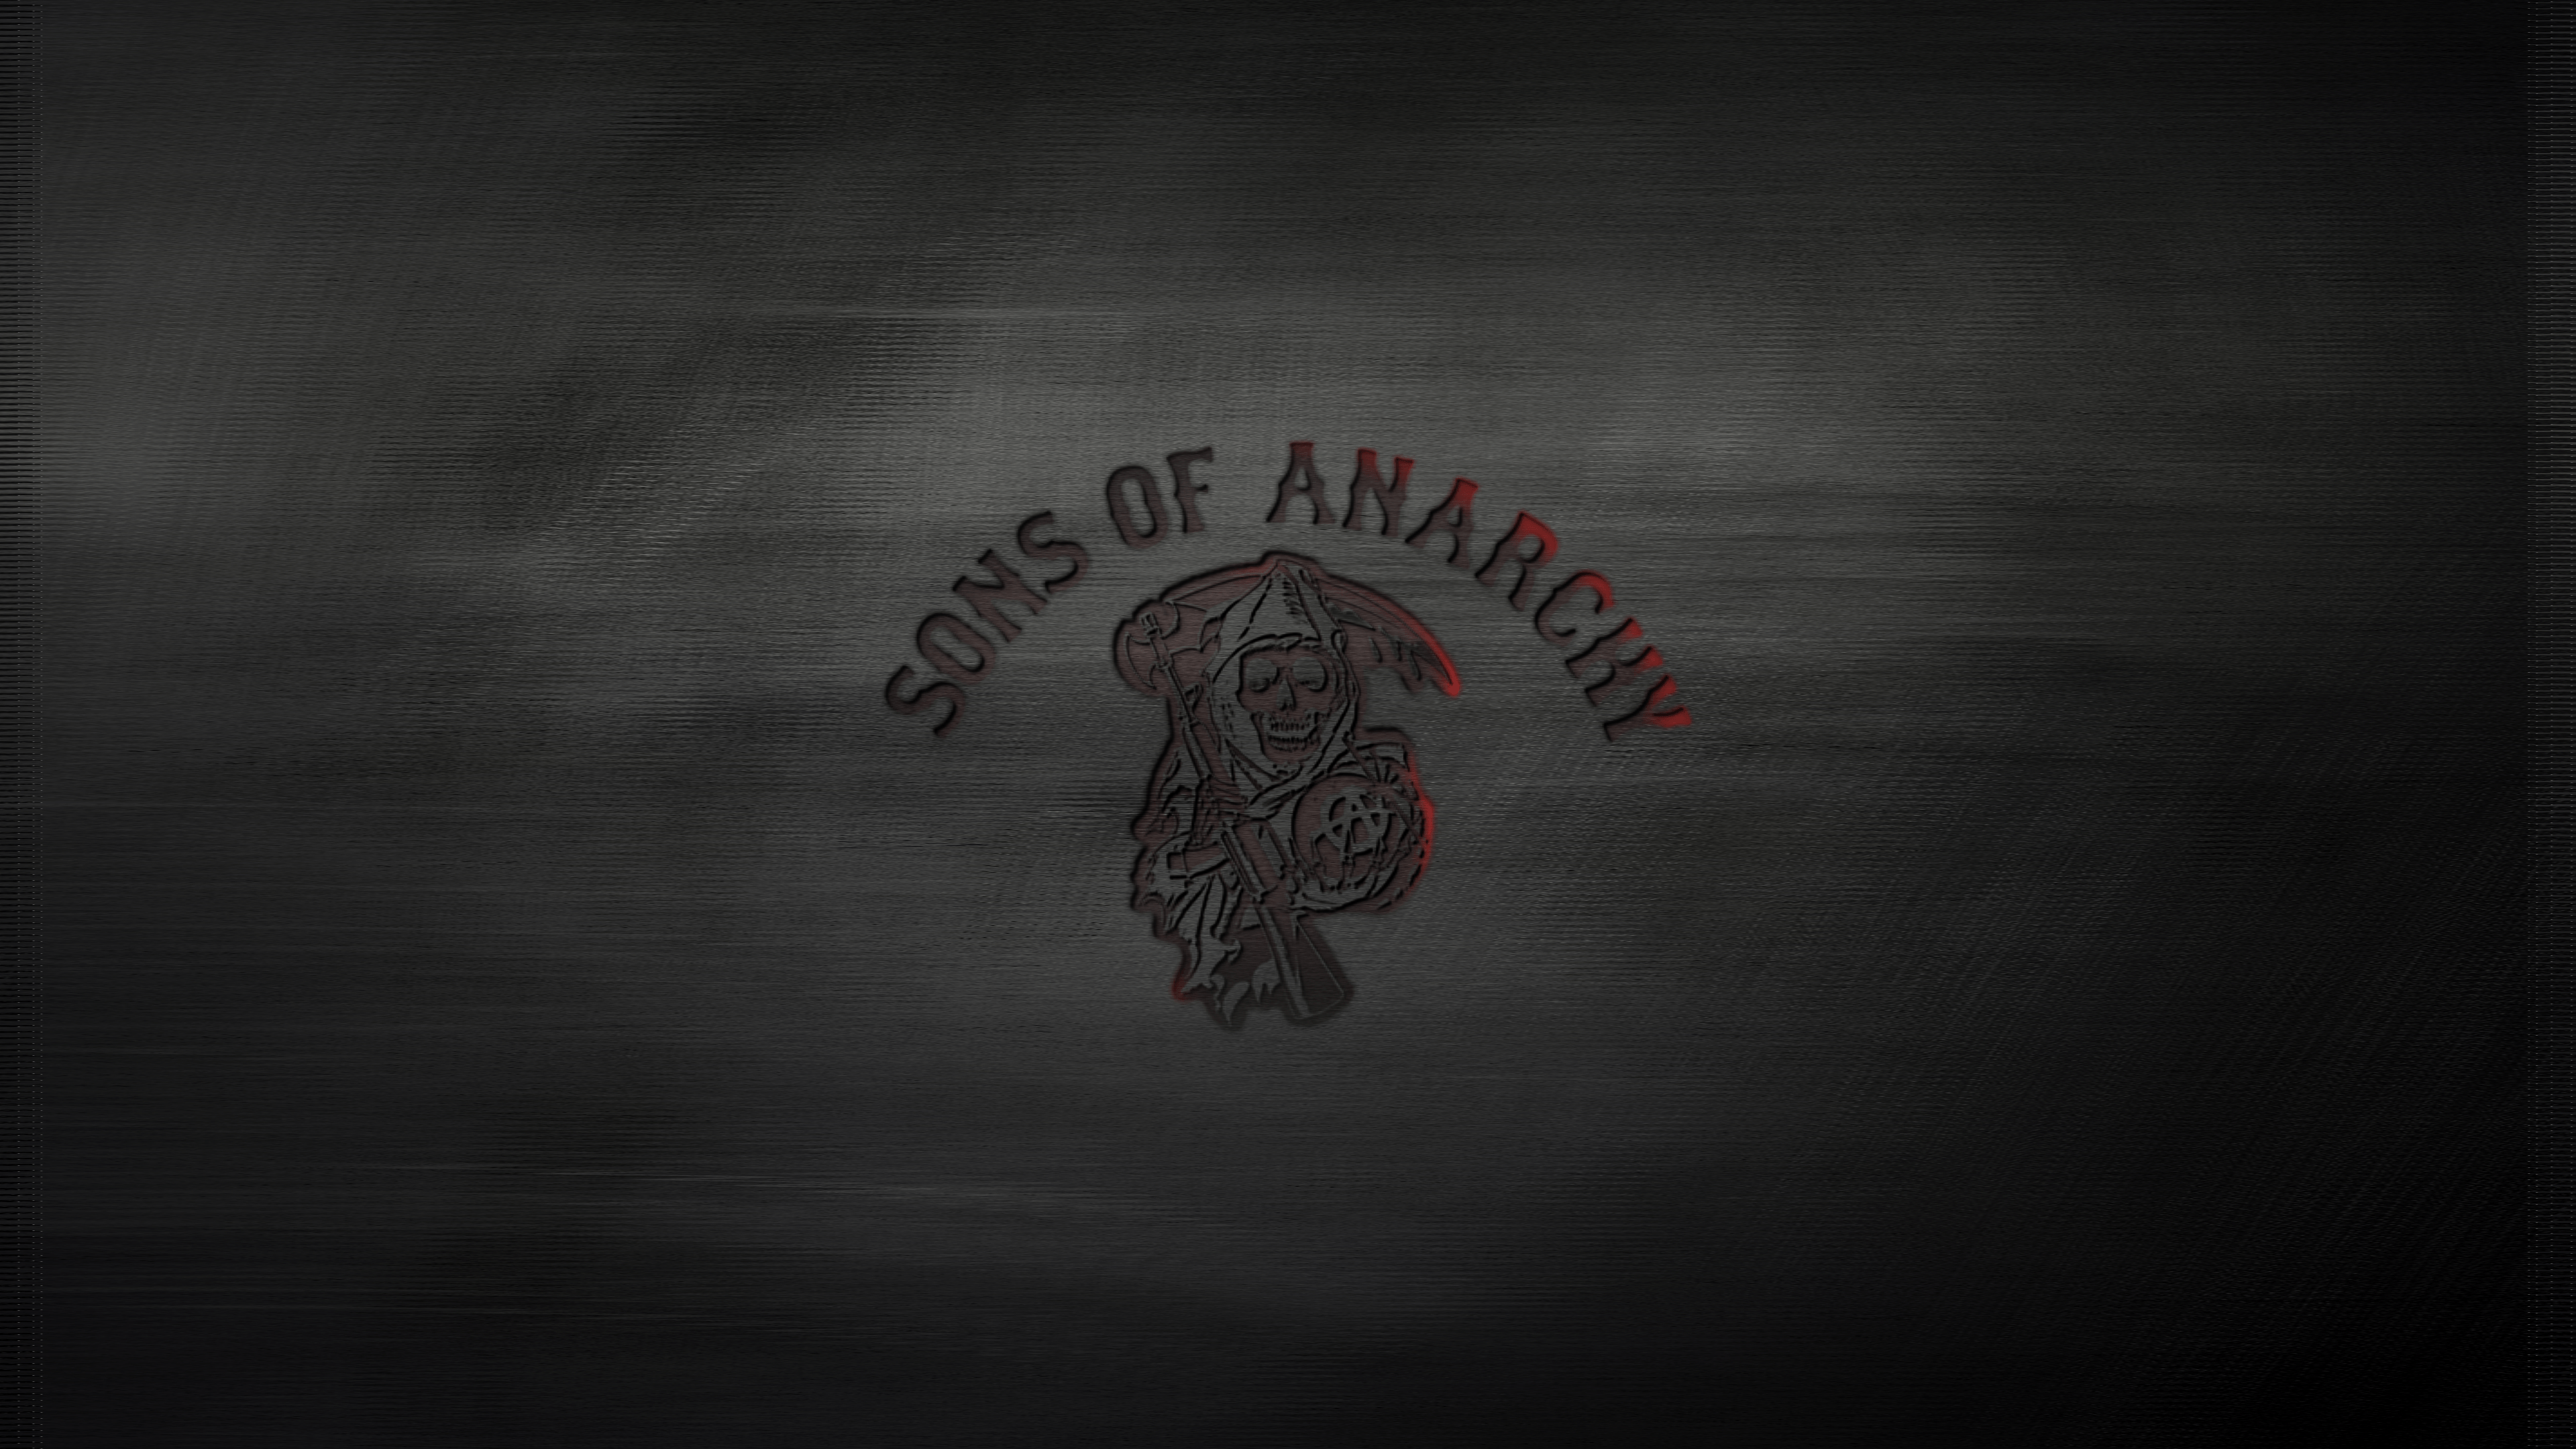 Sons Of Anarchy Wallpaper Request